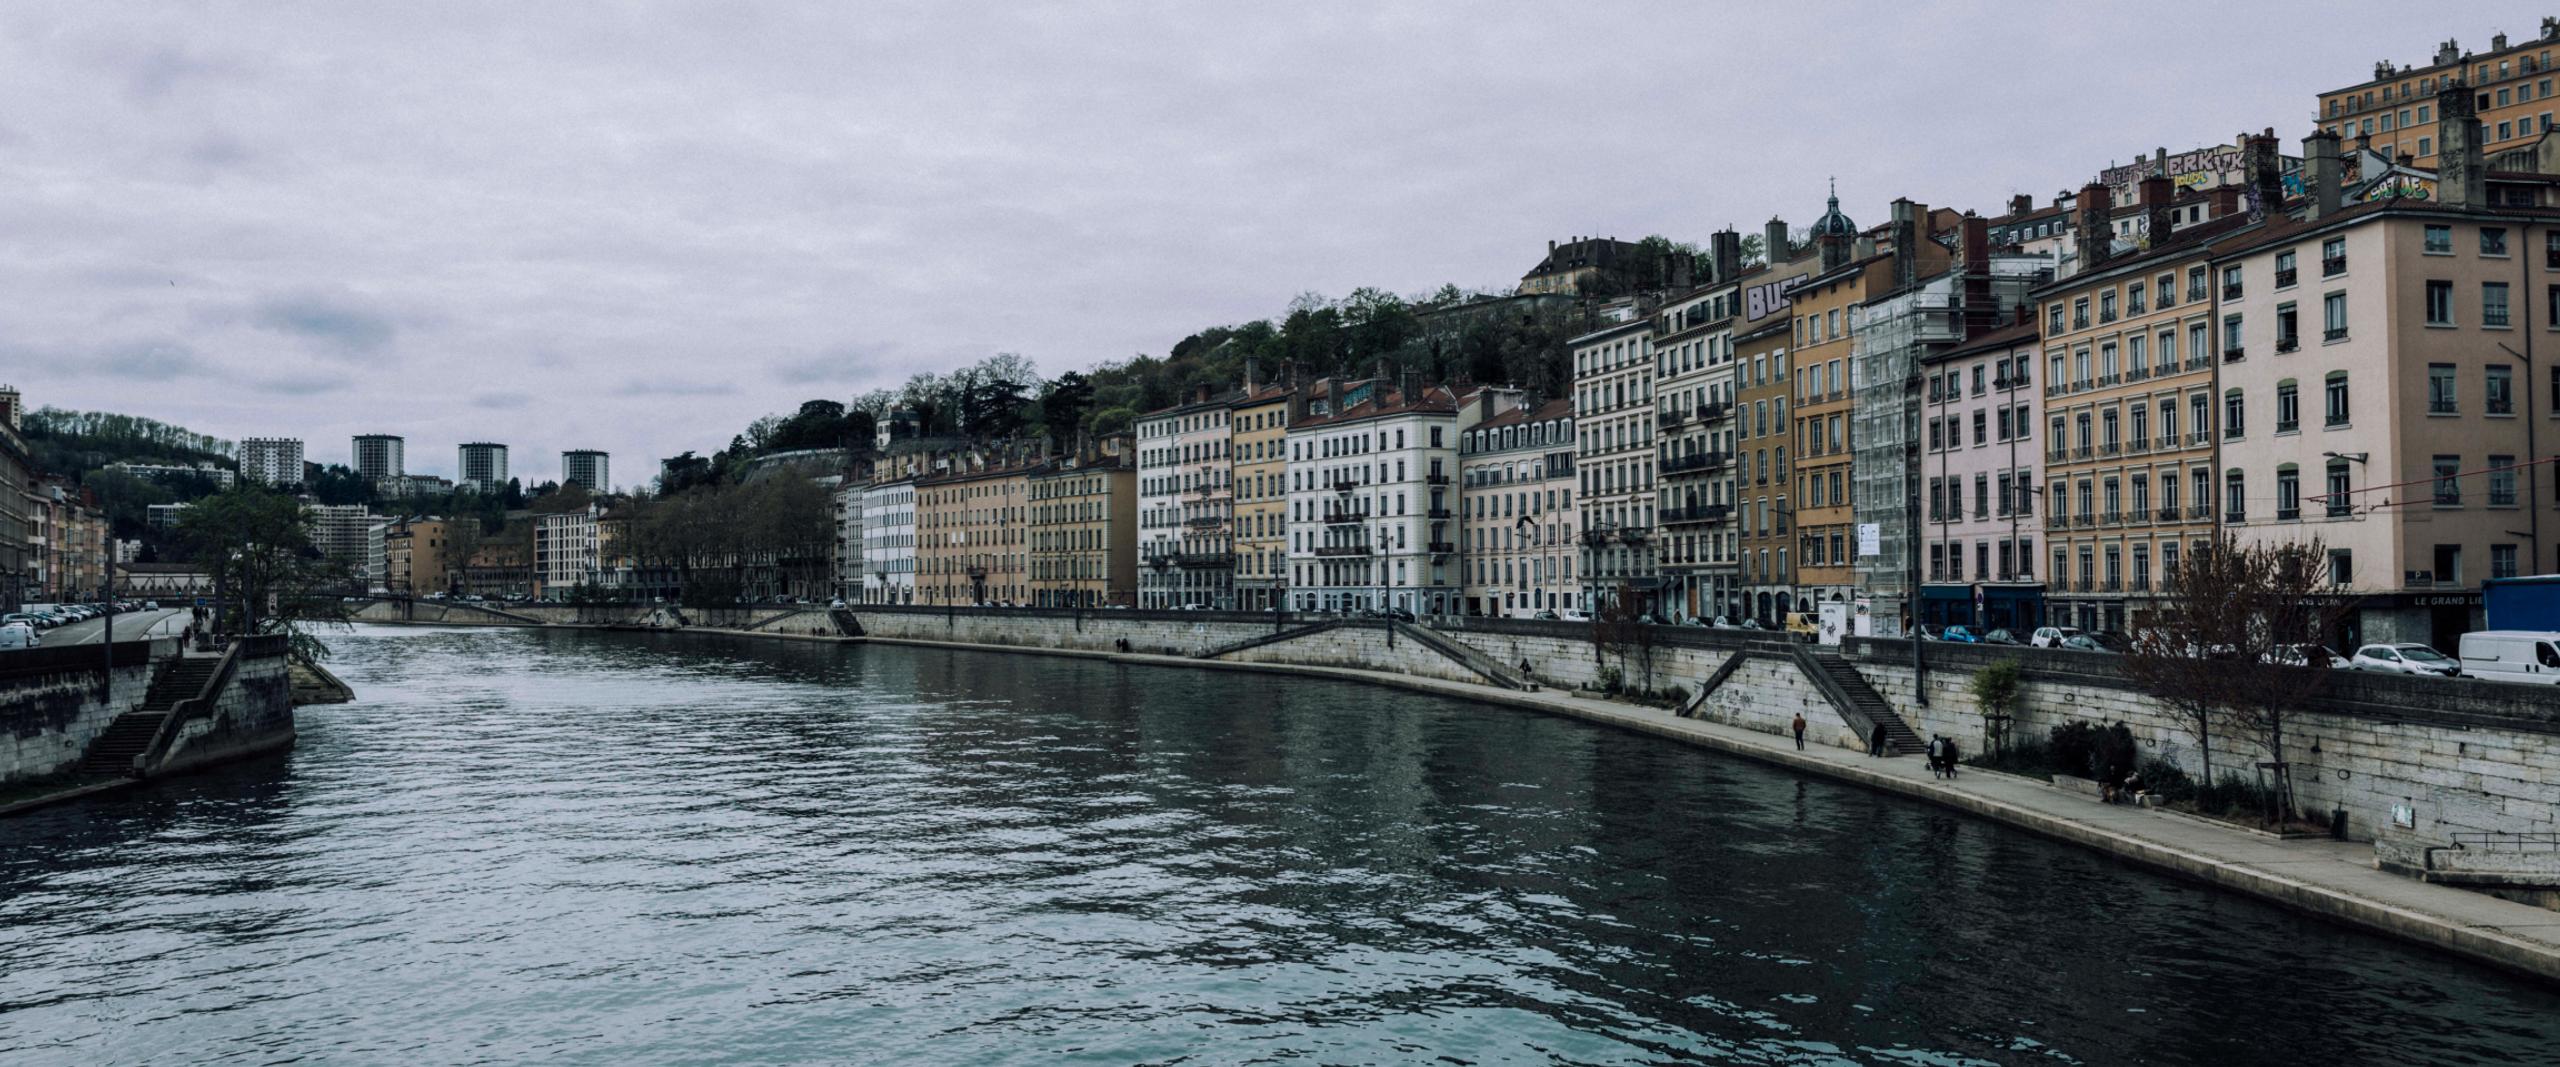 River running through the city of Lyon, France on a cloudy day